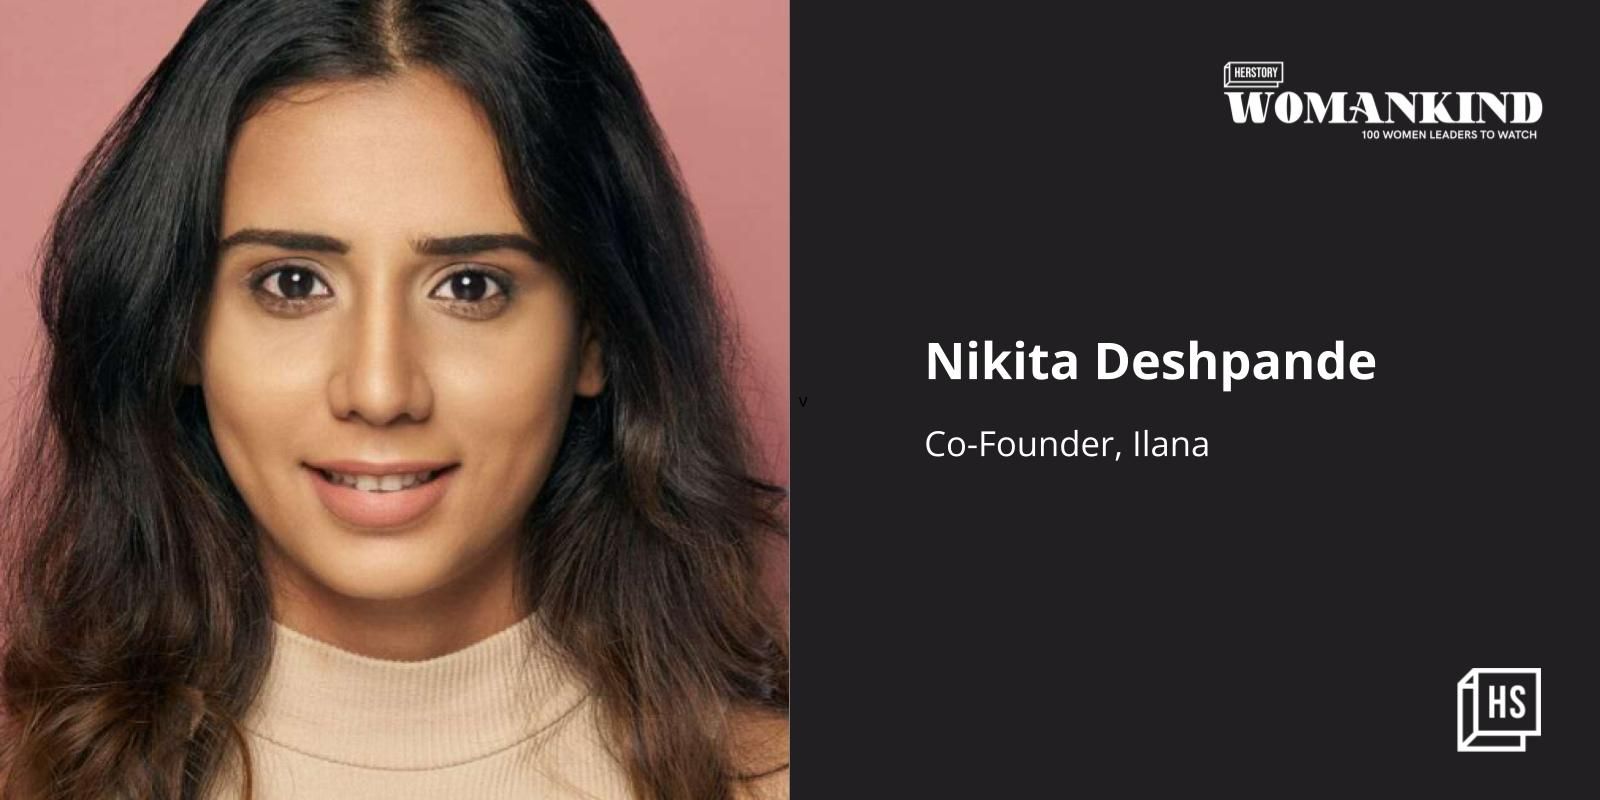 [100 Emerging Women Leaders] How Nikita Deshpande is bringing transparency and sustainability in the beauty and skincare industry 